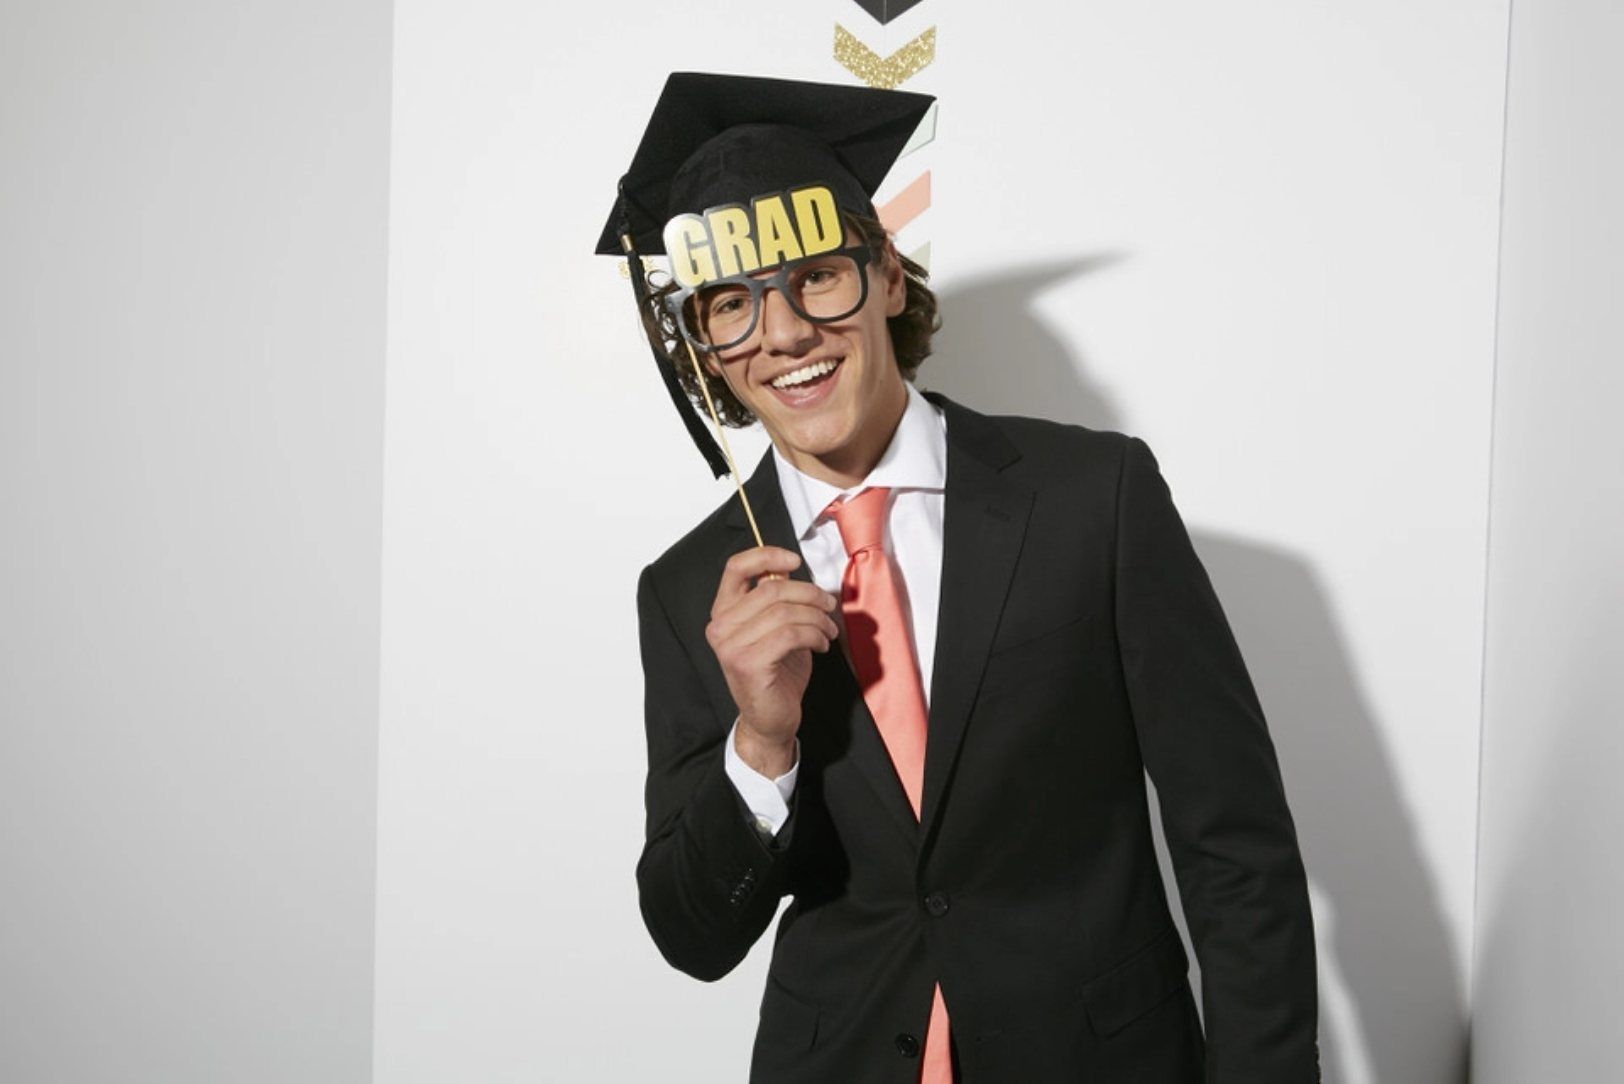 Guy at senior prom with photo booth props, salmon pink tie & black prom suit for high school graduation.